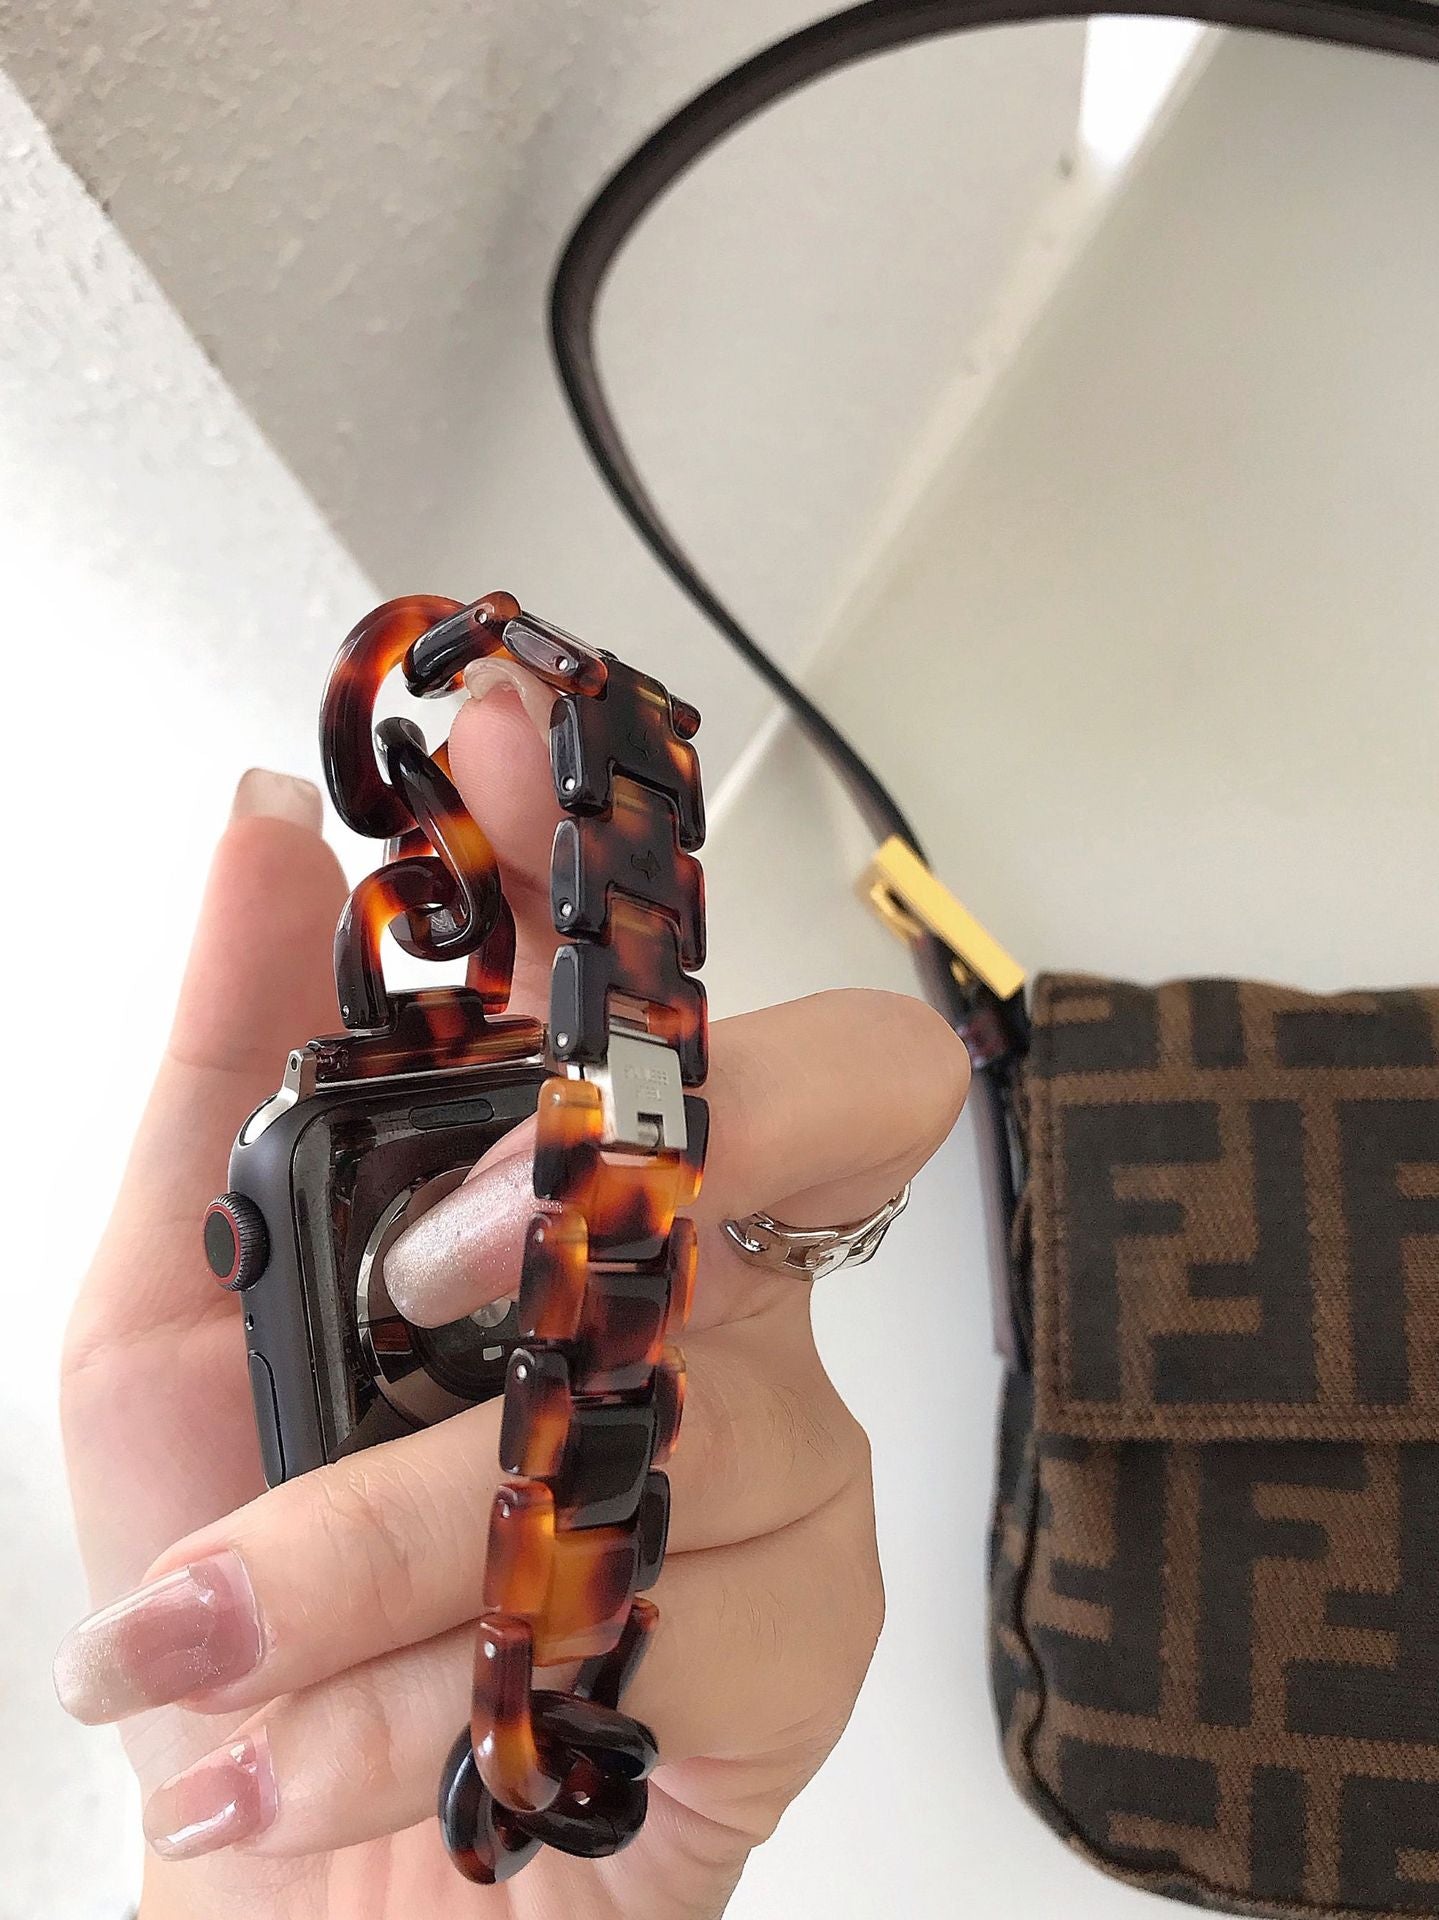 Cowboy Chain Ring Resin Apple Watch Strap